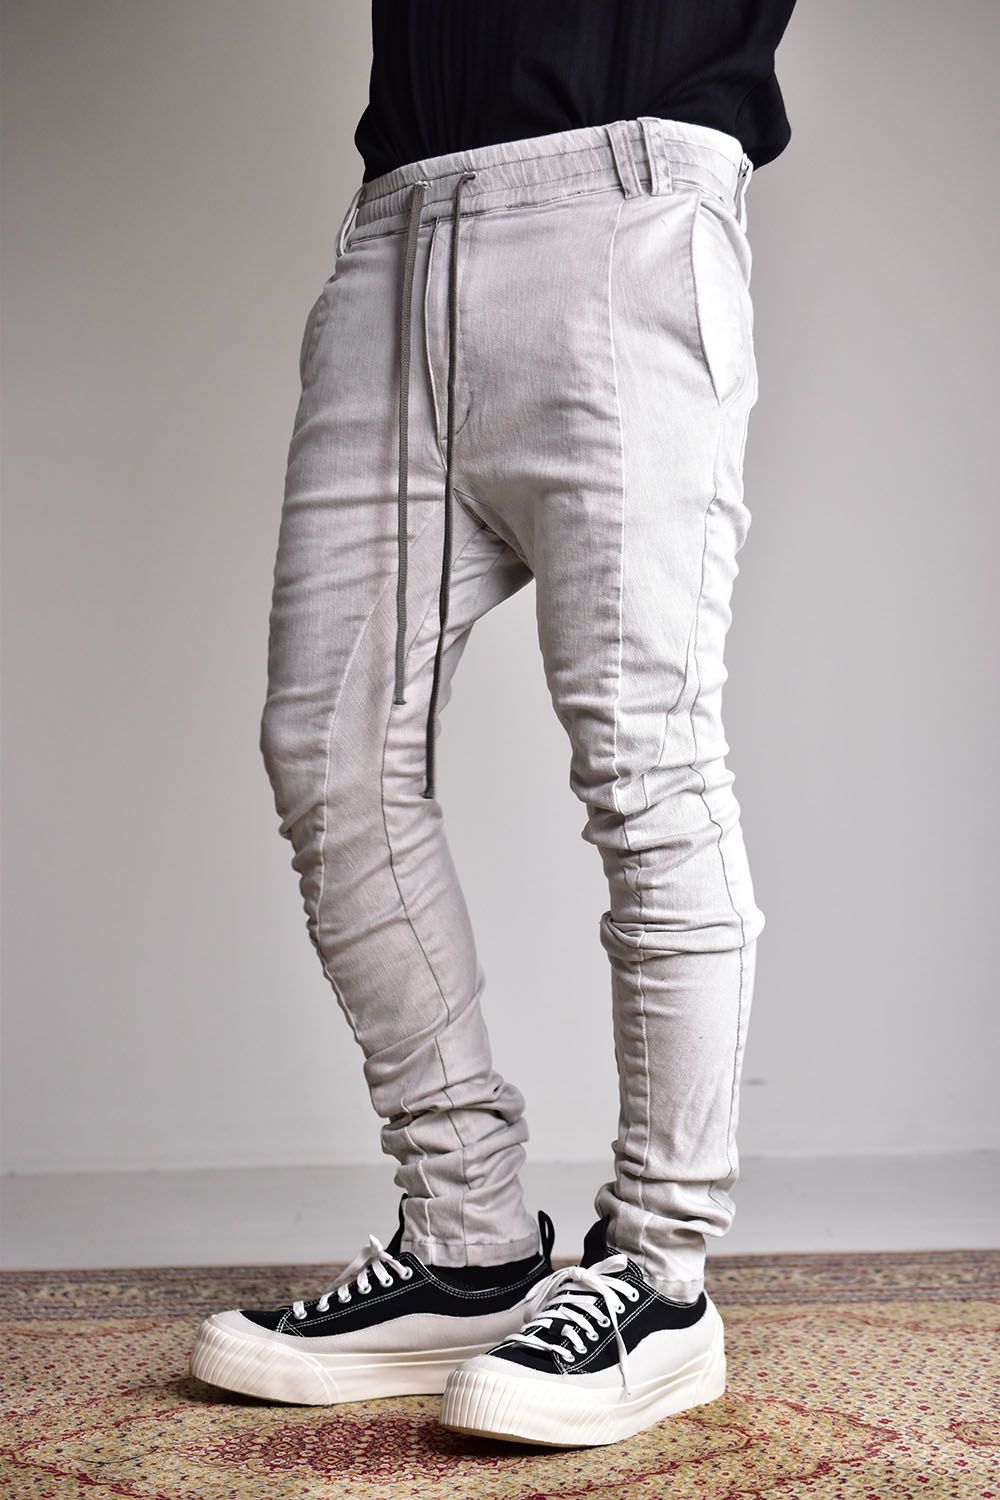 Dust Dyed Anatomical Fitted Long Pants"White"/ダストダイアナトミカルフィットロングパンツ"ホワイト"